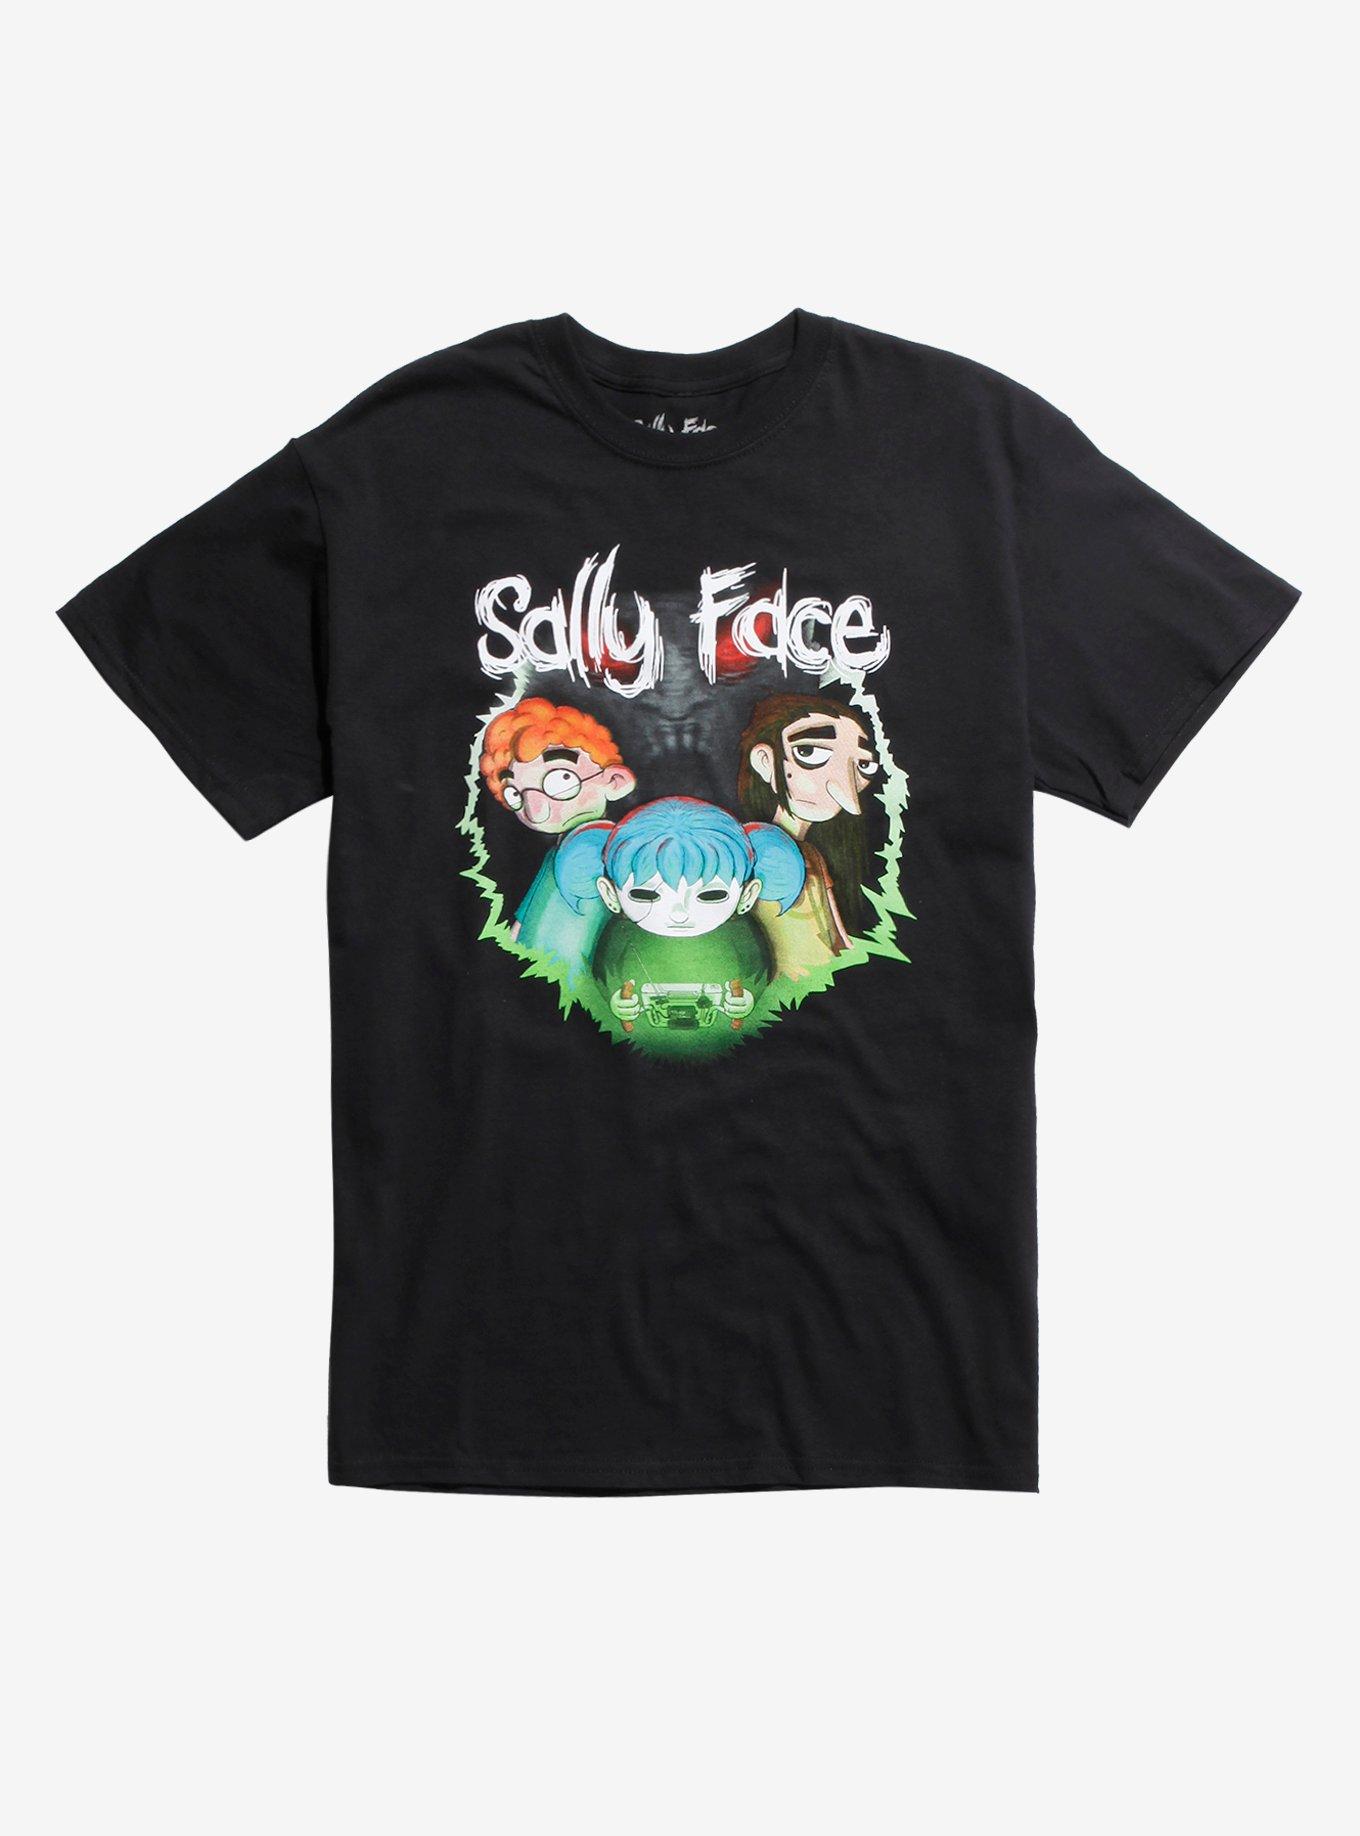 Sally Face Episode Two The Wretched T-Shirt, MULTI, hi-res